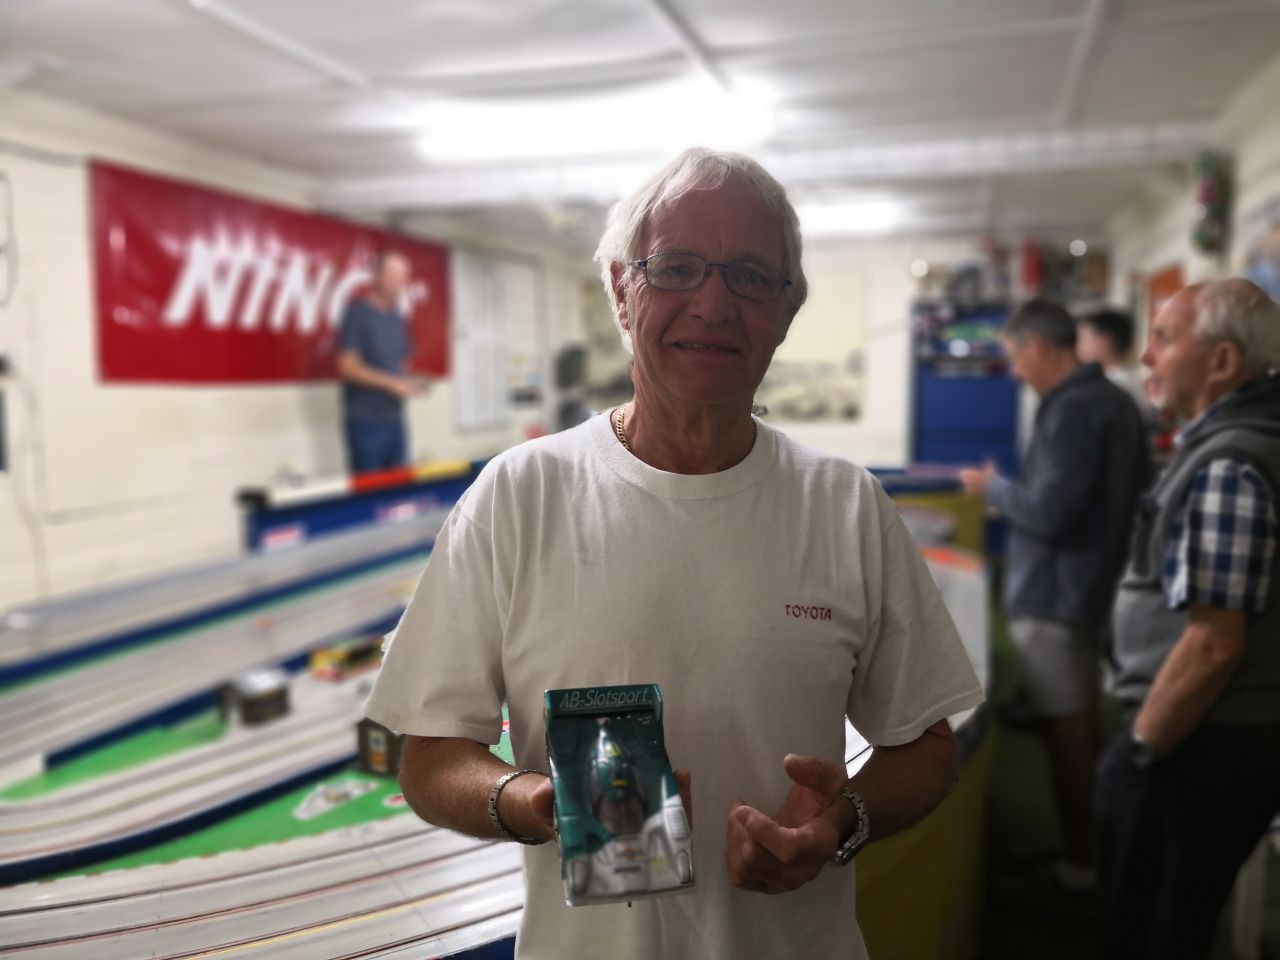 Finchley club member John Ovens turned his son Michael onto slot cars at an early age. Michael eventually became a champion in two divisions, but dropped the sport when he got older. Most British slot car racers are over 50 years old, leading to concerns that their sport is headed towards extinction. 